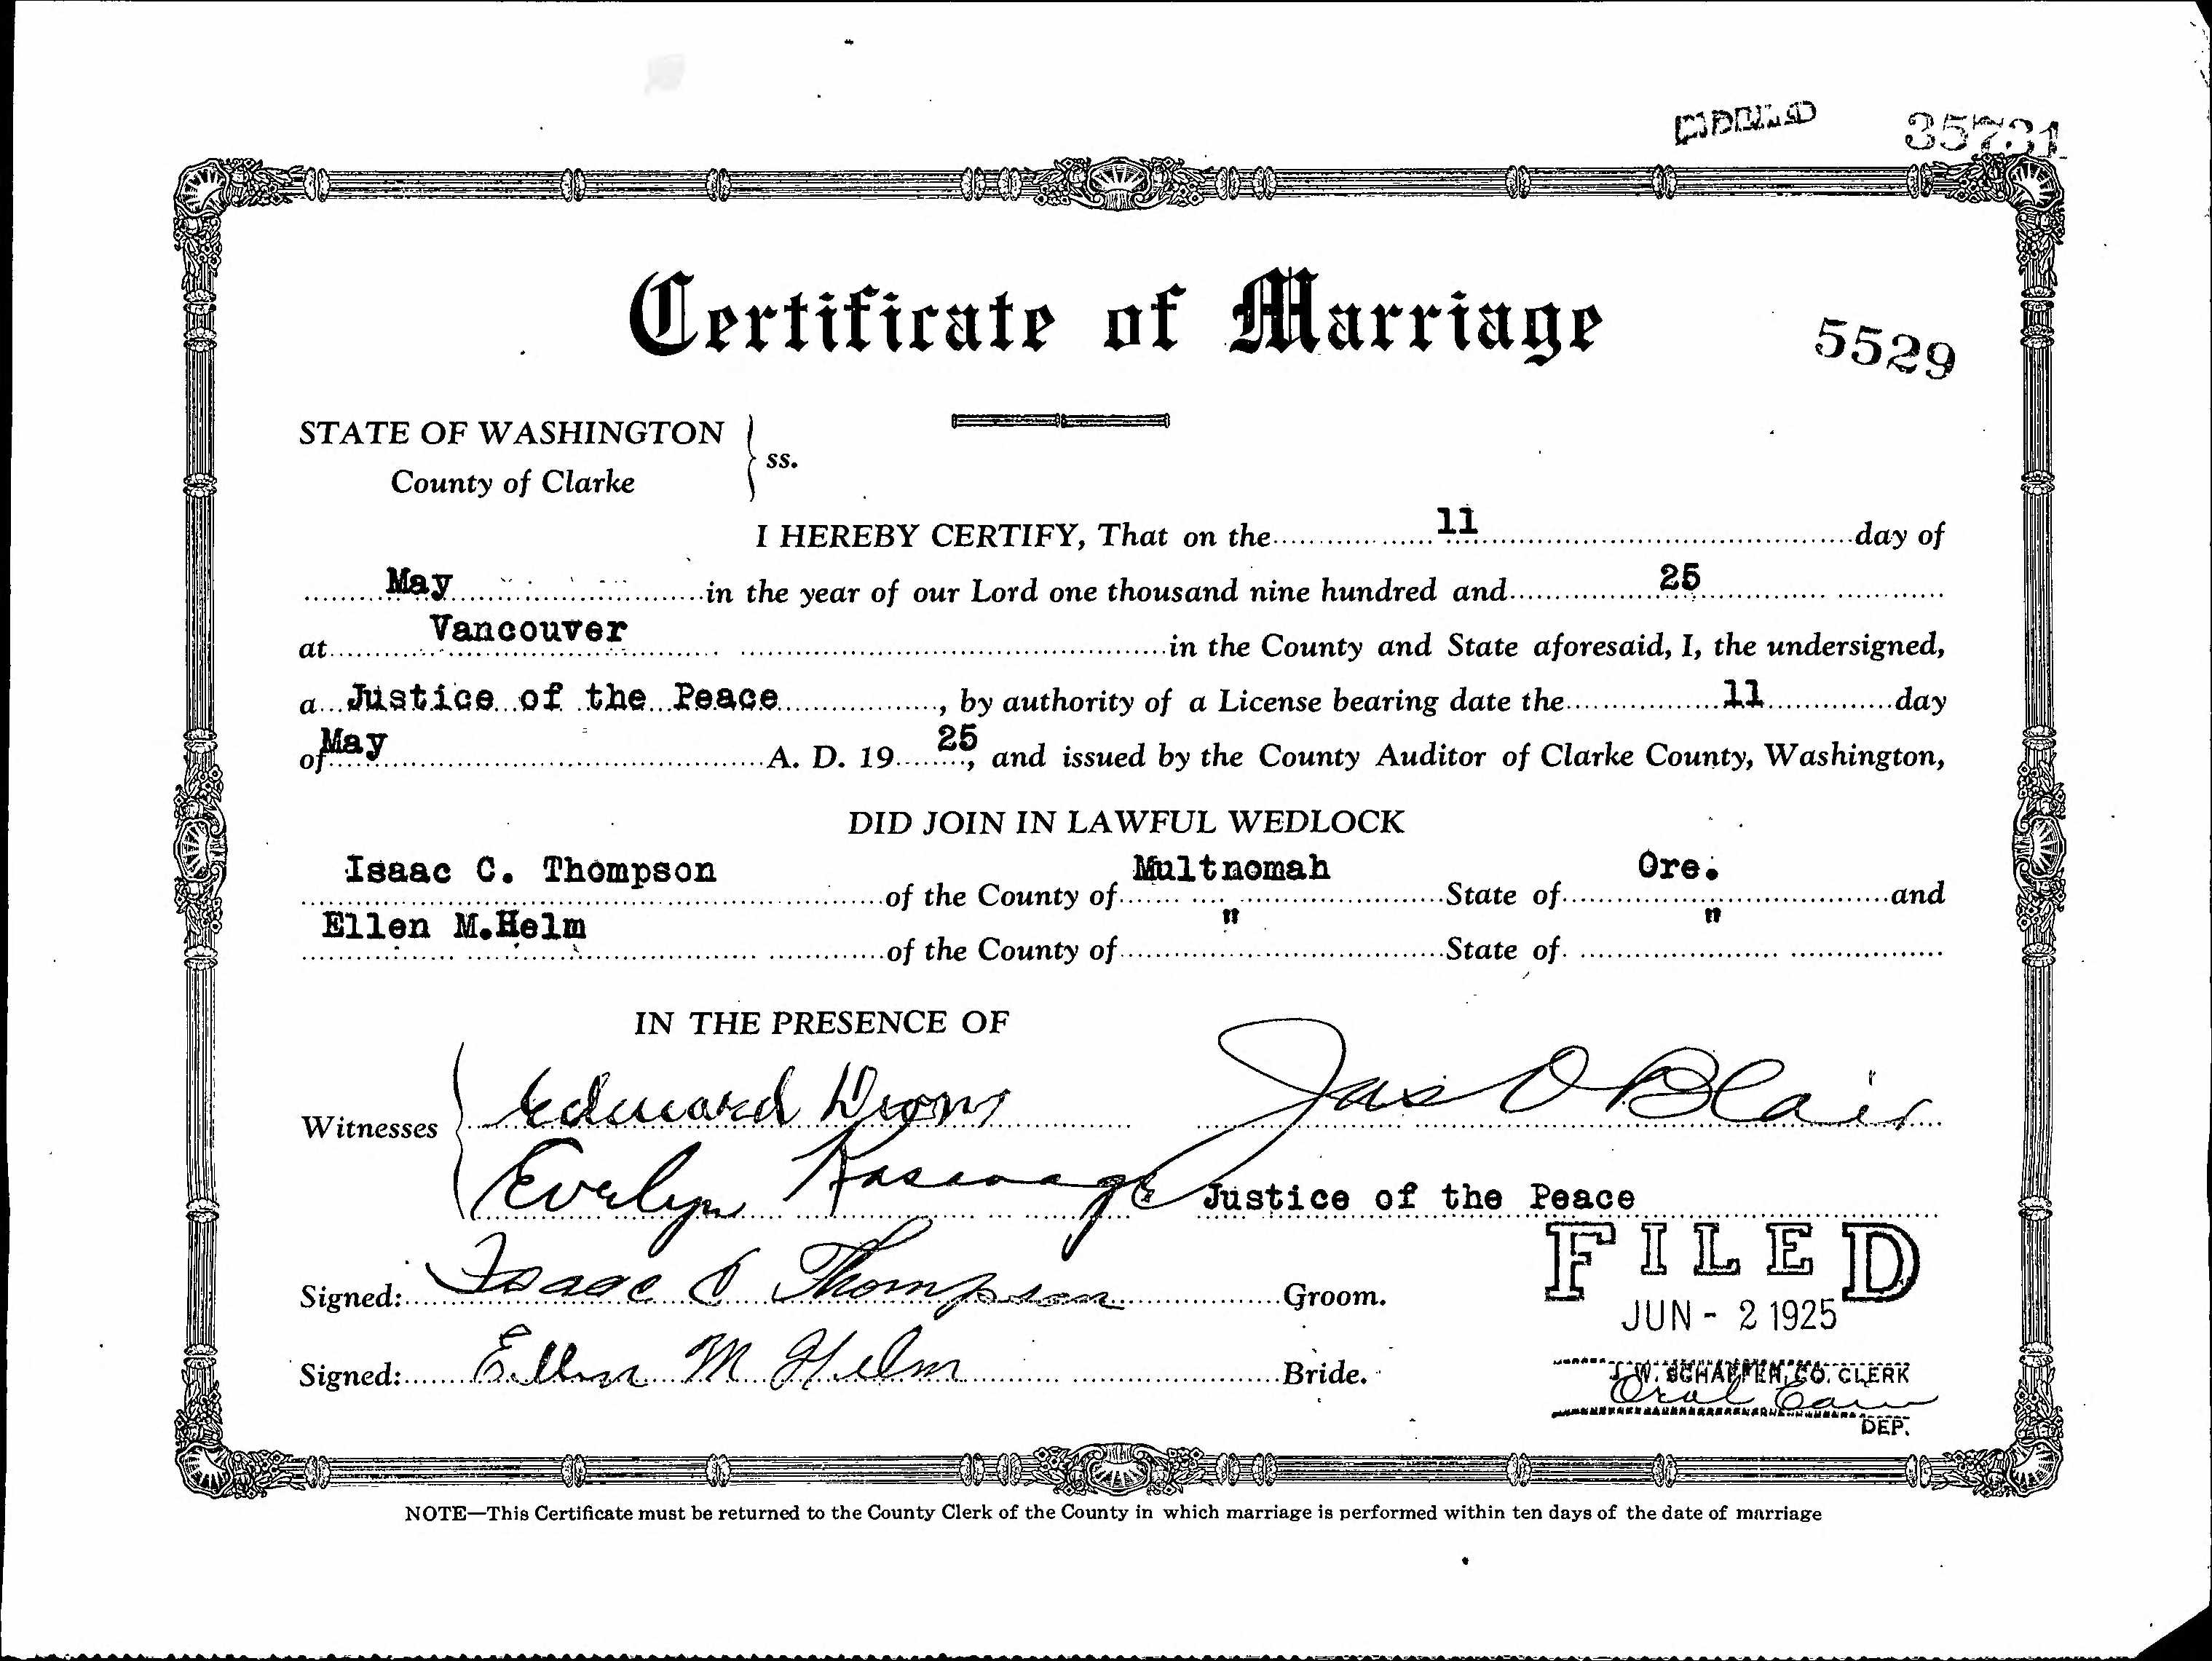 Certificate of marriage of Isaac C. Thompson and Ellen M. Helm, page 2